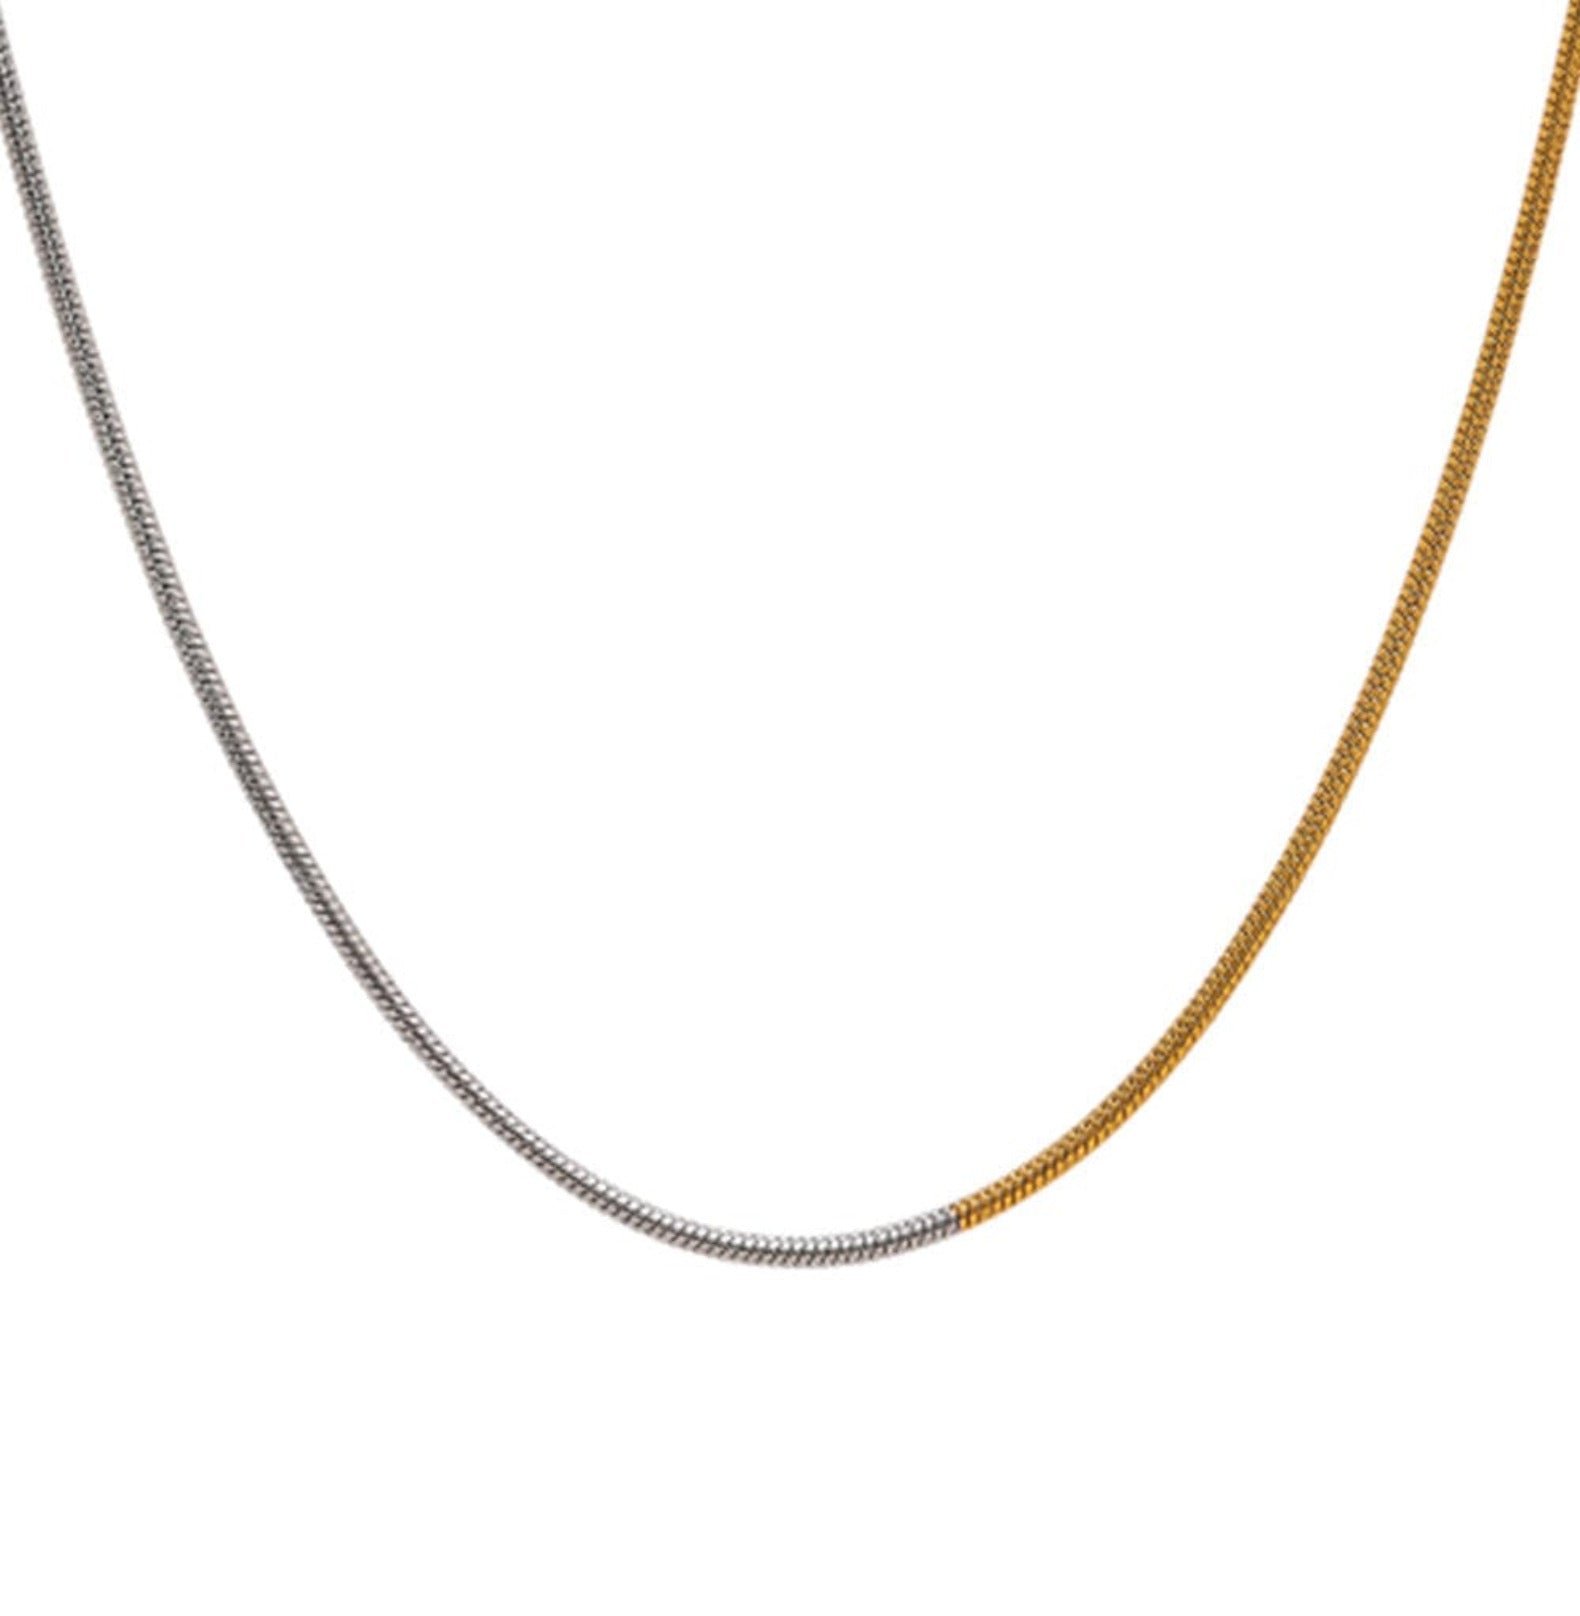 TWINS CHAIN neck Yubama Jewelry Online Store - The Elegant Designs of Gold and Silver ! 2mm 